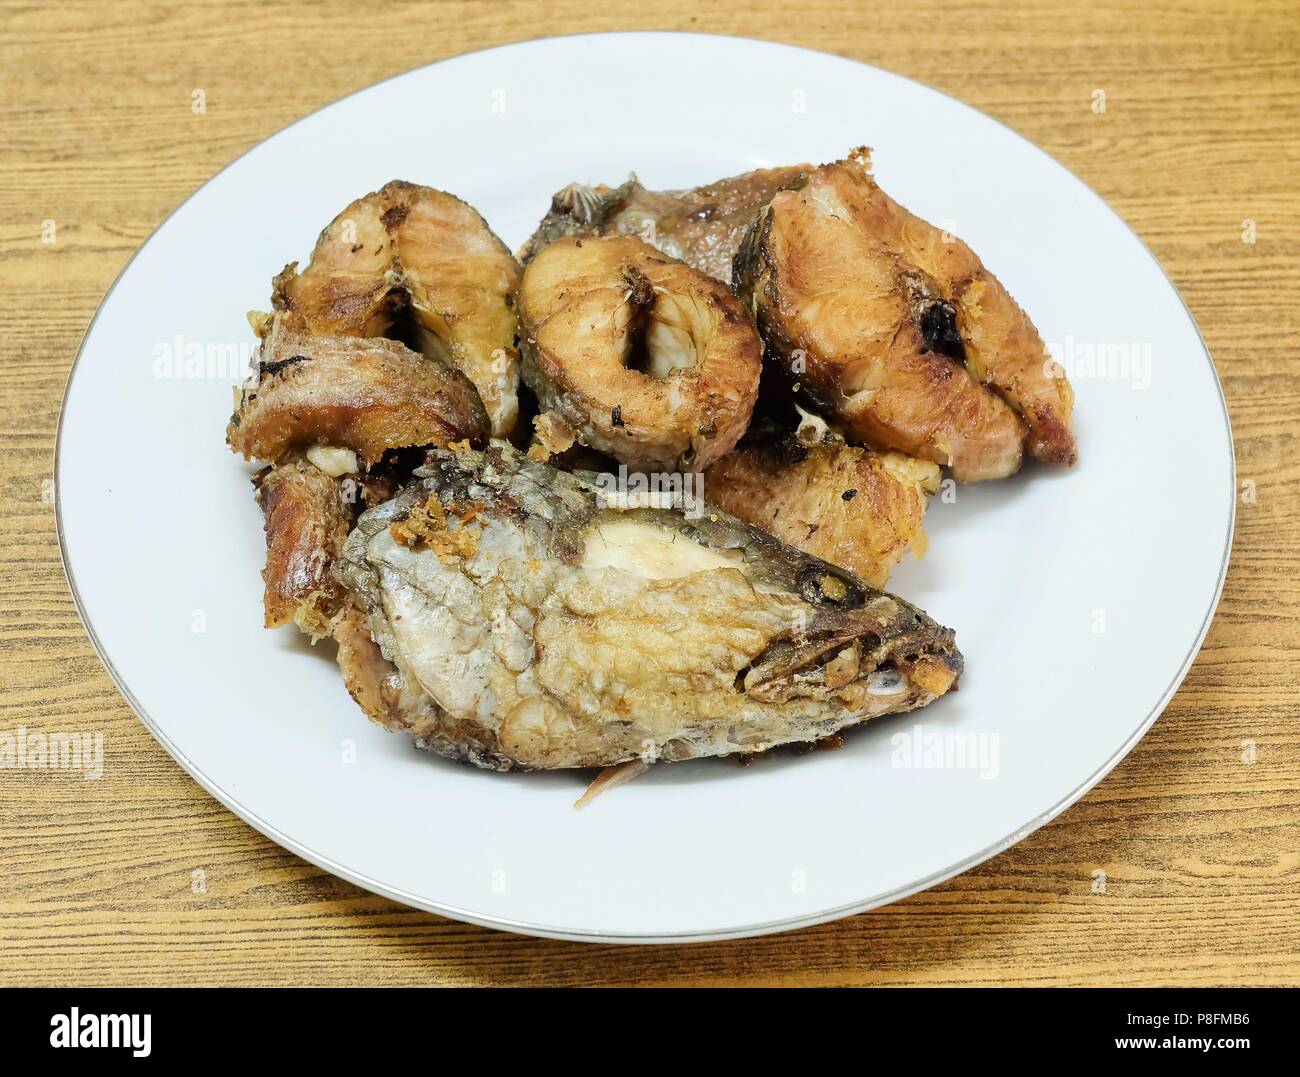 Traditional Delicuous Deep Fried Striped Snakehead Fish on A White Plate,  High in Protein, Vitamin B12, Niacin or B3 and Omega-3, Essential Nutrient  f Stock Photo - Alamy